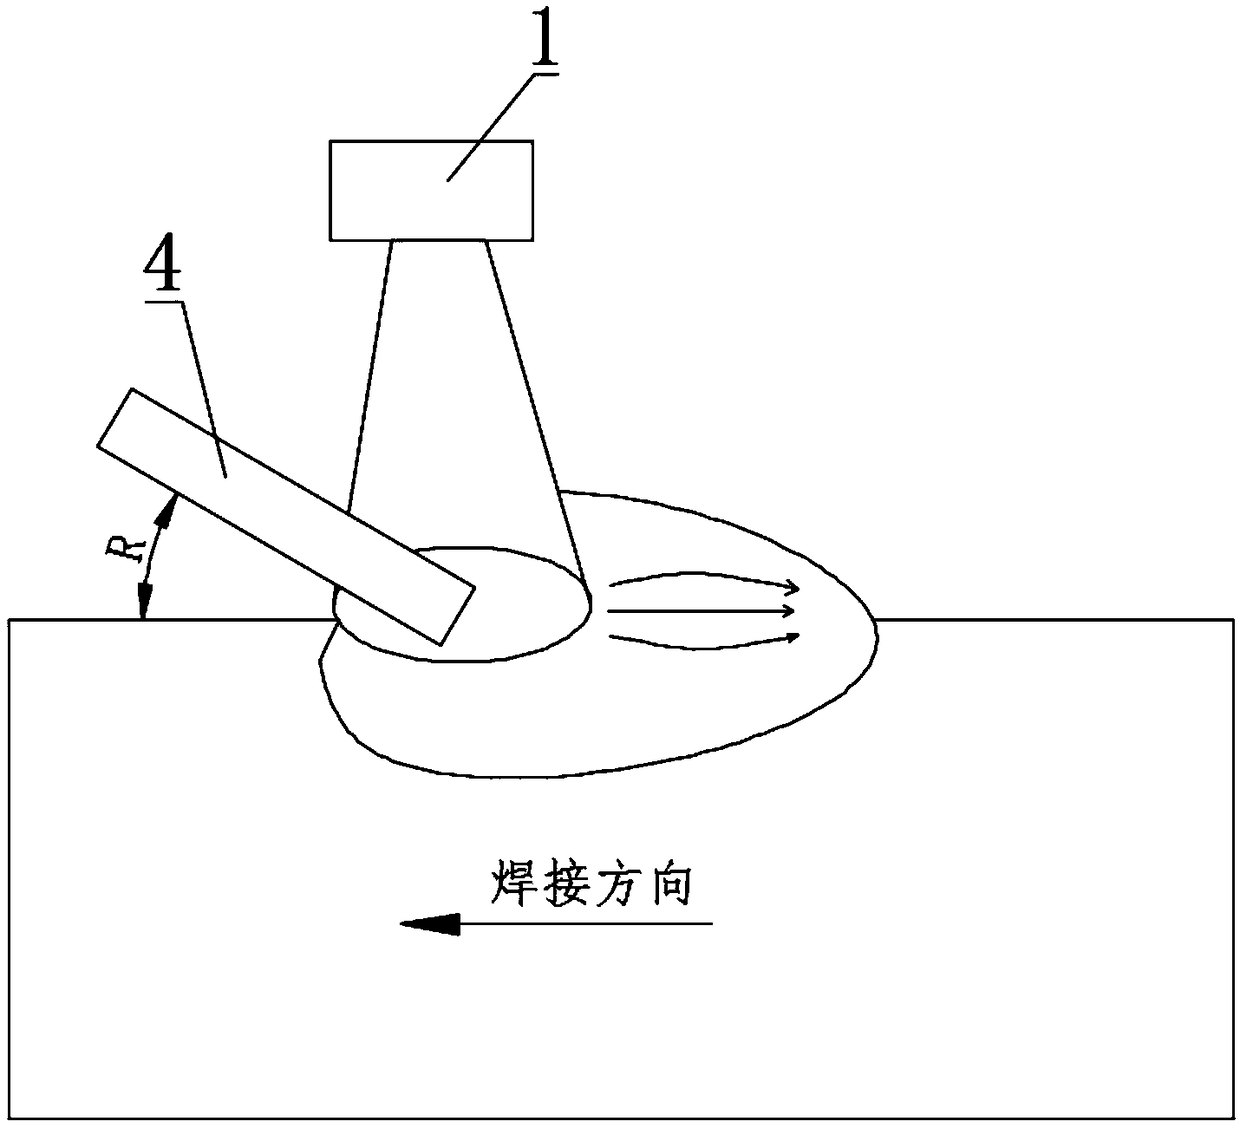 High-speed laser brazing method for automobile ceiling